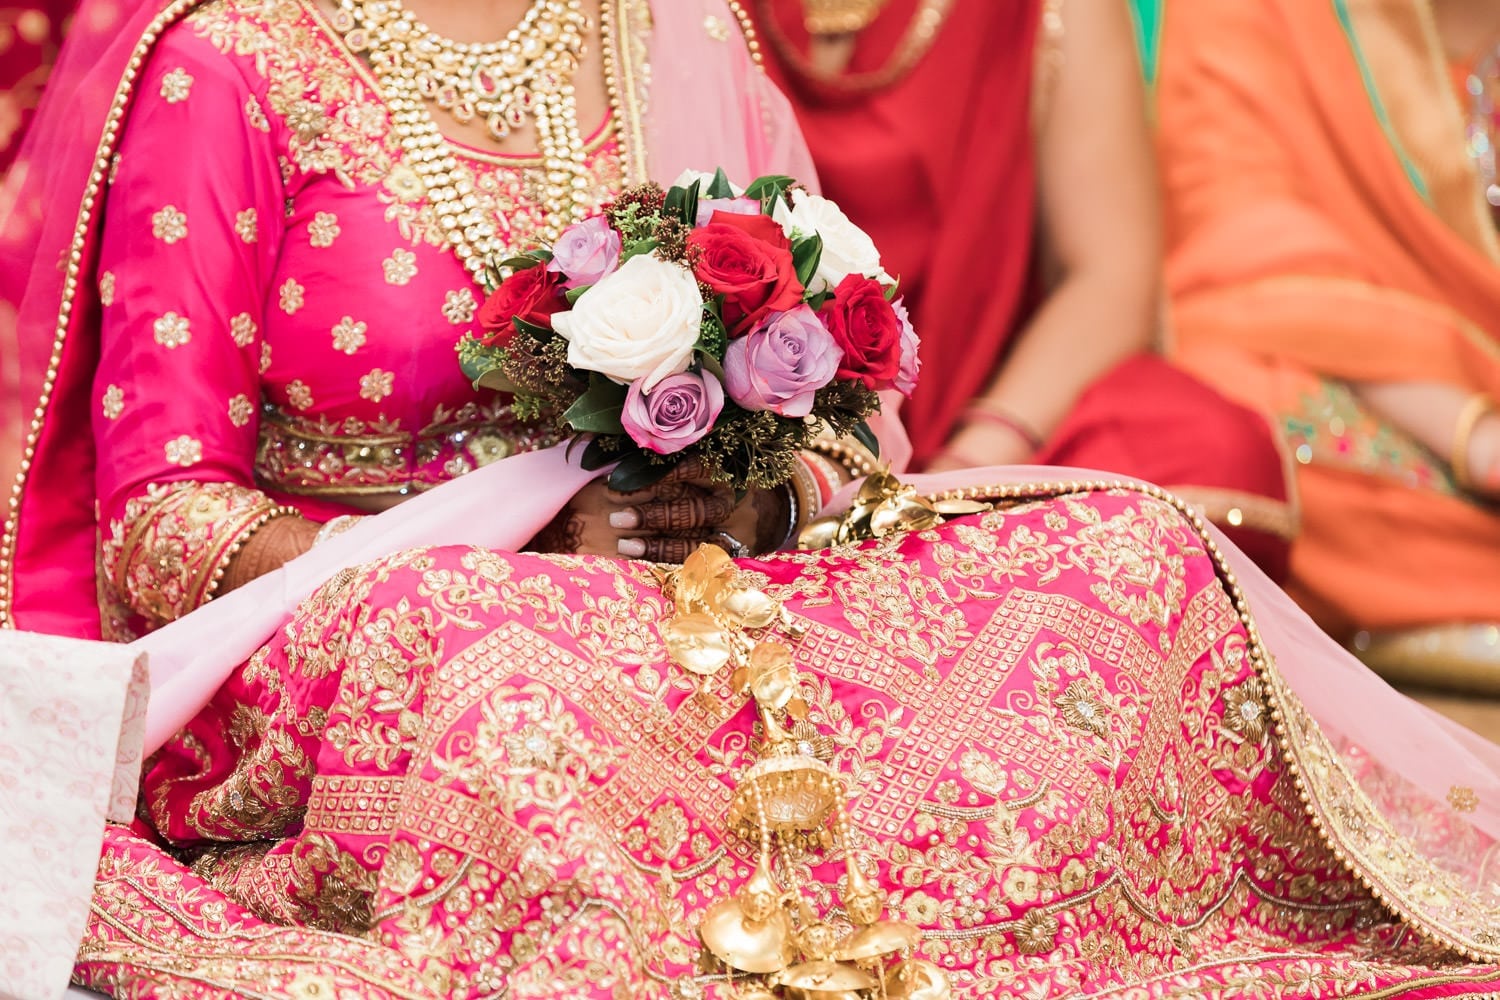 Indian wedding bouquet at the temple | Indian wedding photography Vancouver